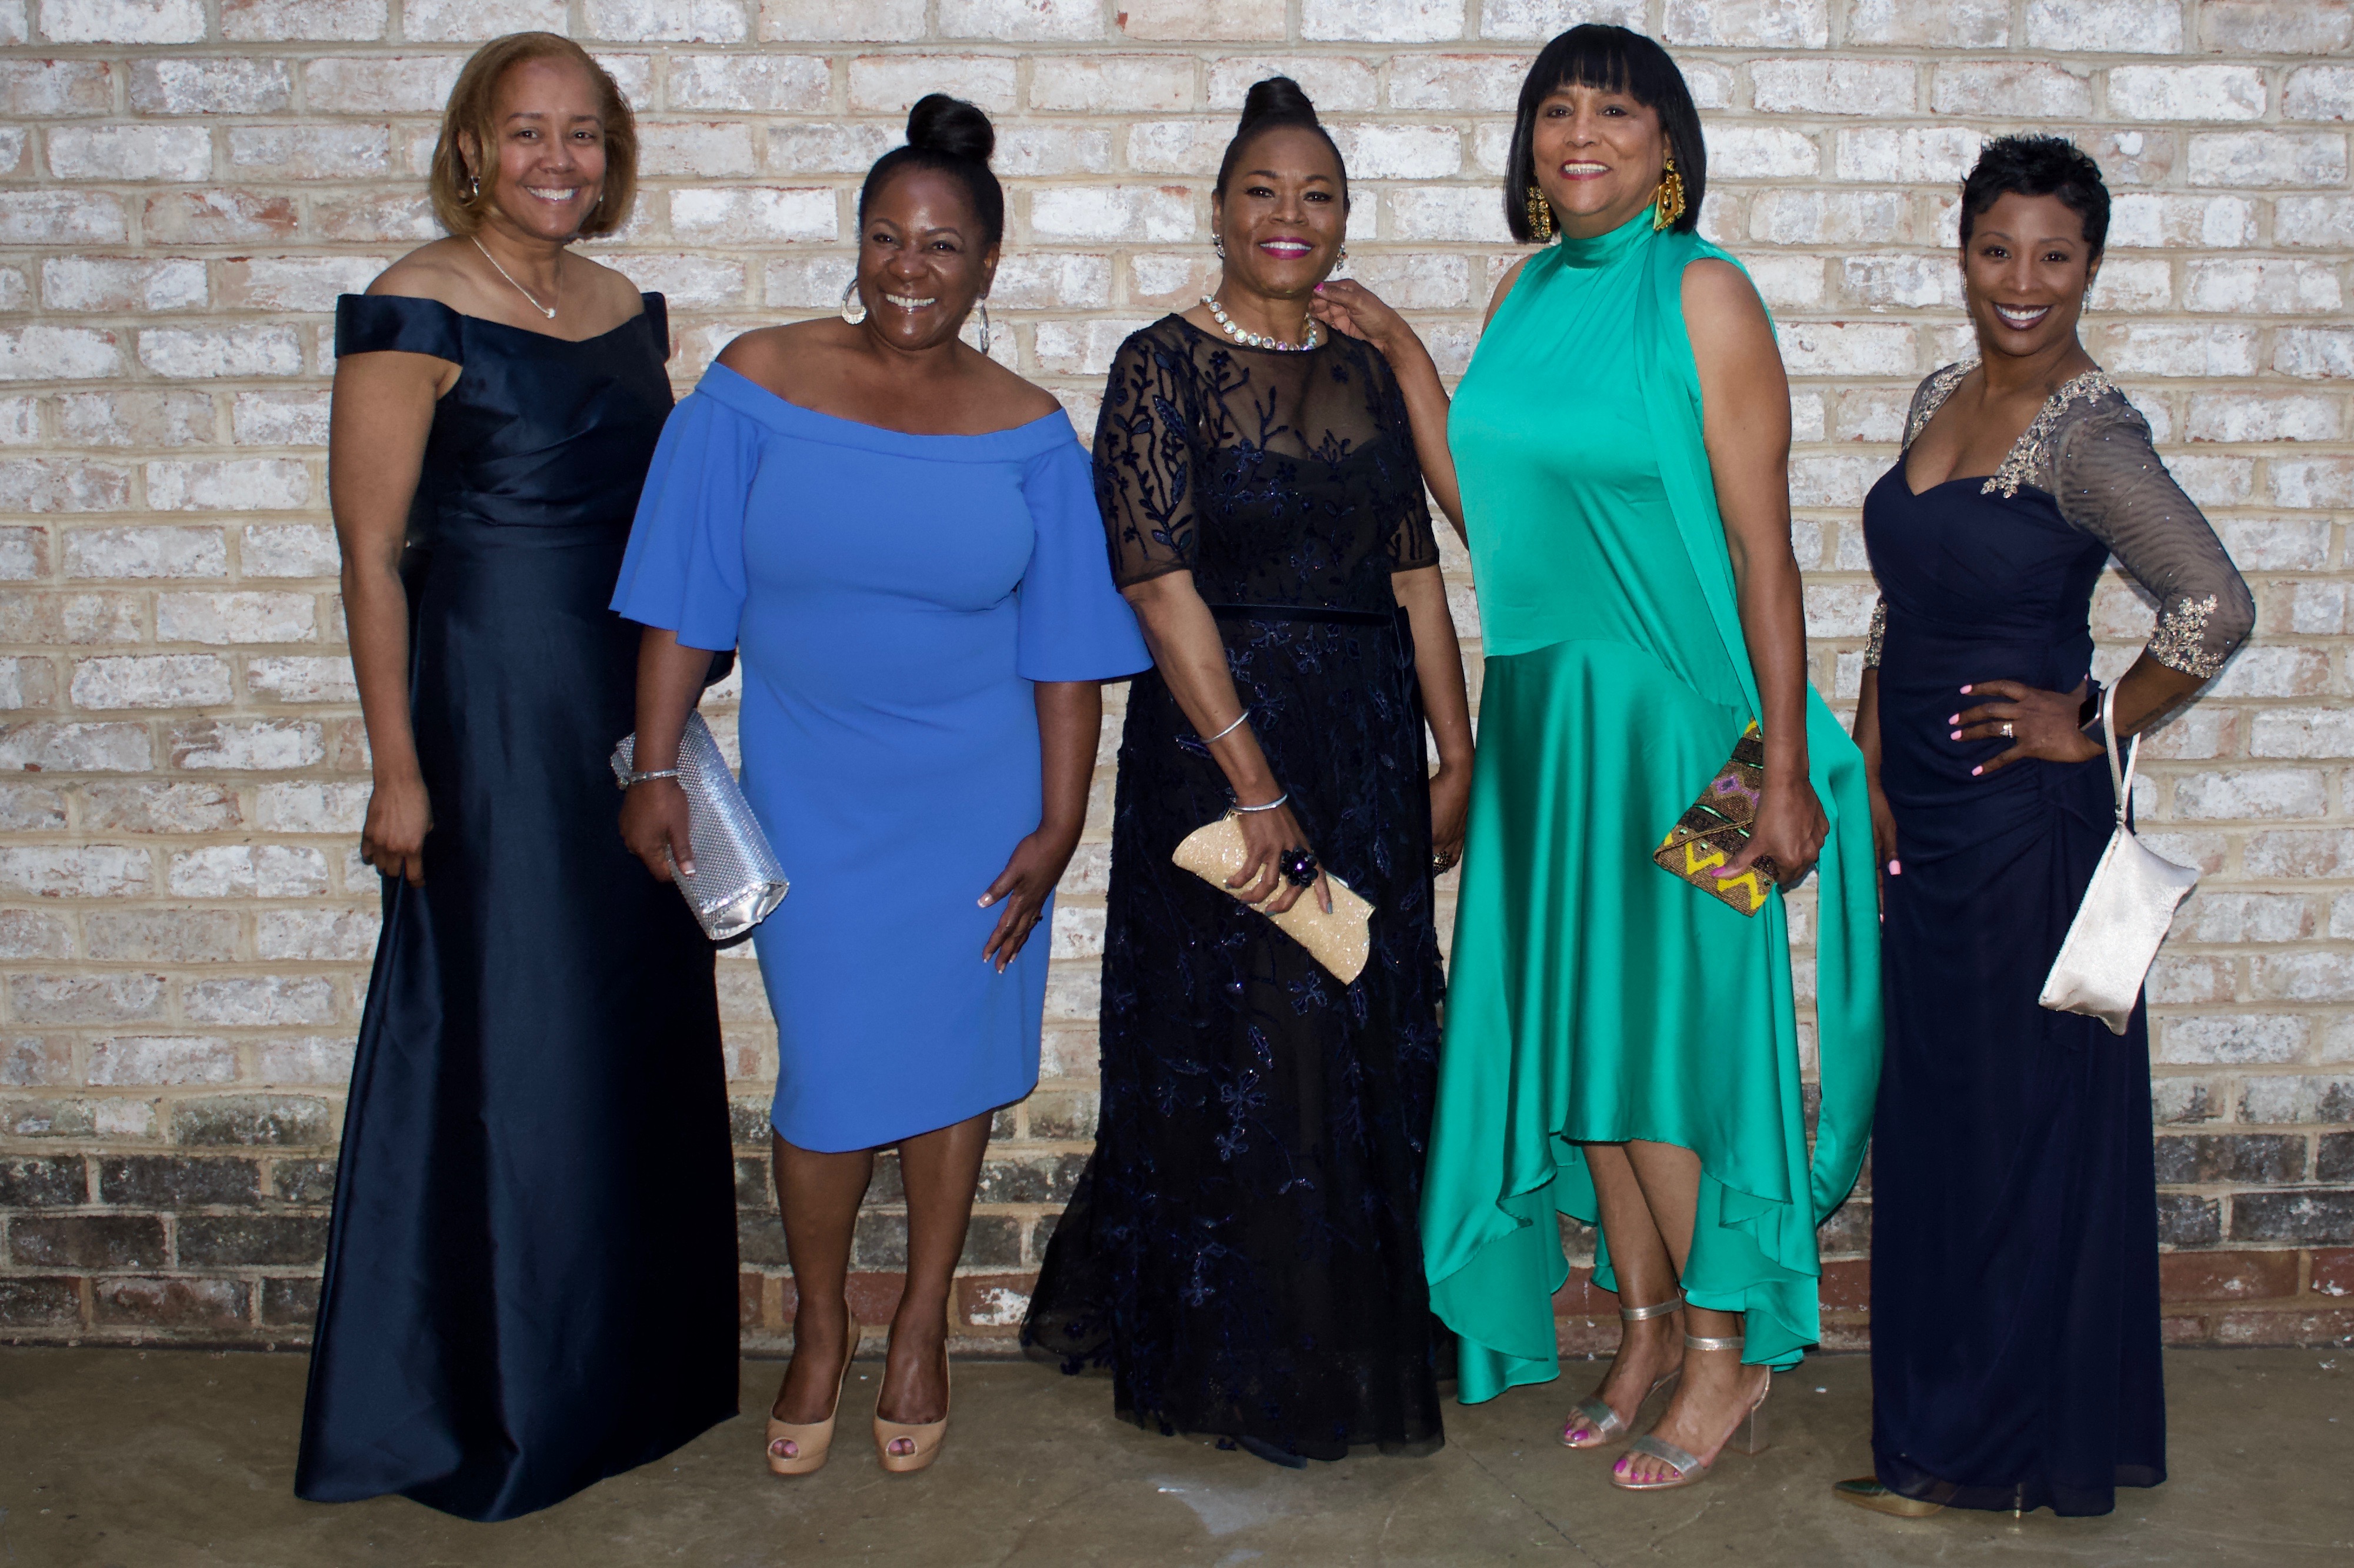 A Night to Remember, the 2019 Club Twenty-One Dinner Dance in Hershey, PA